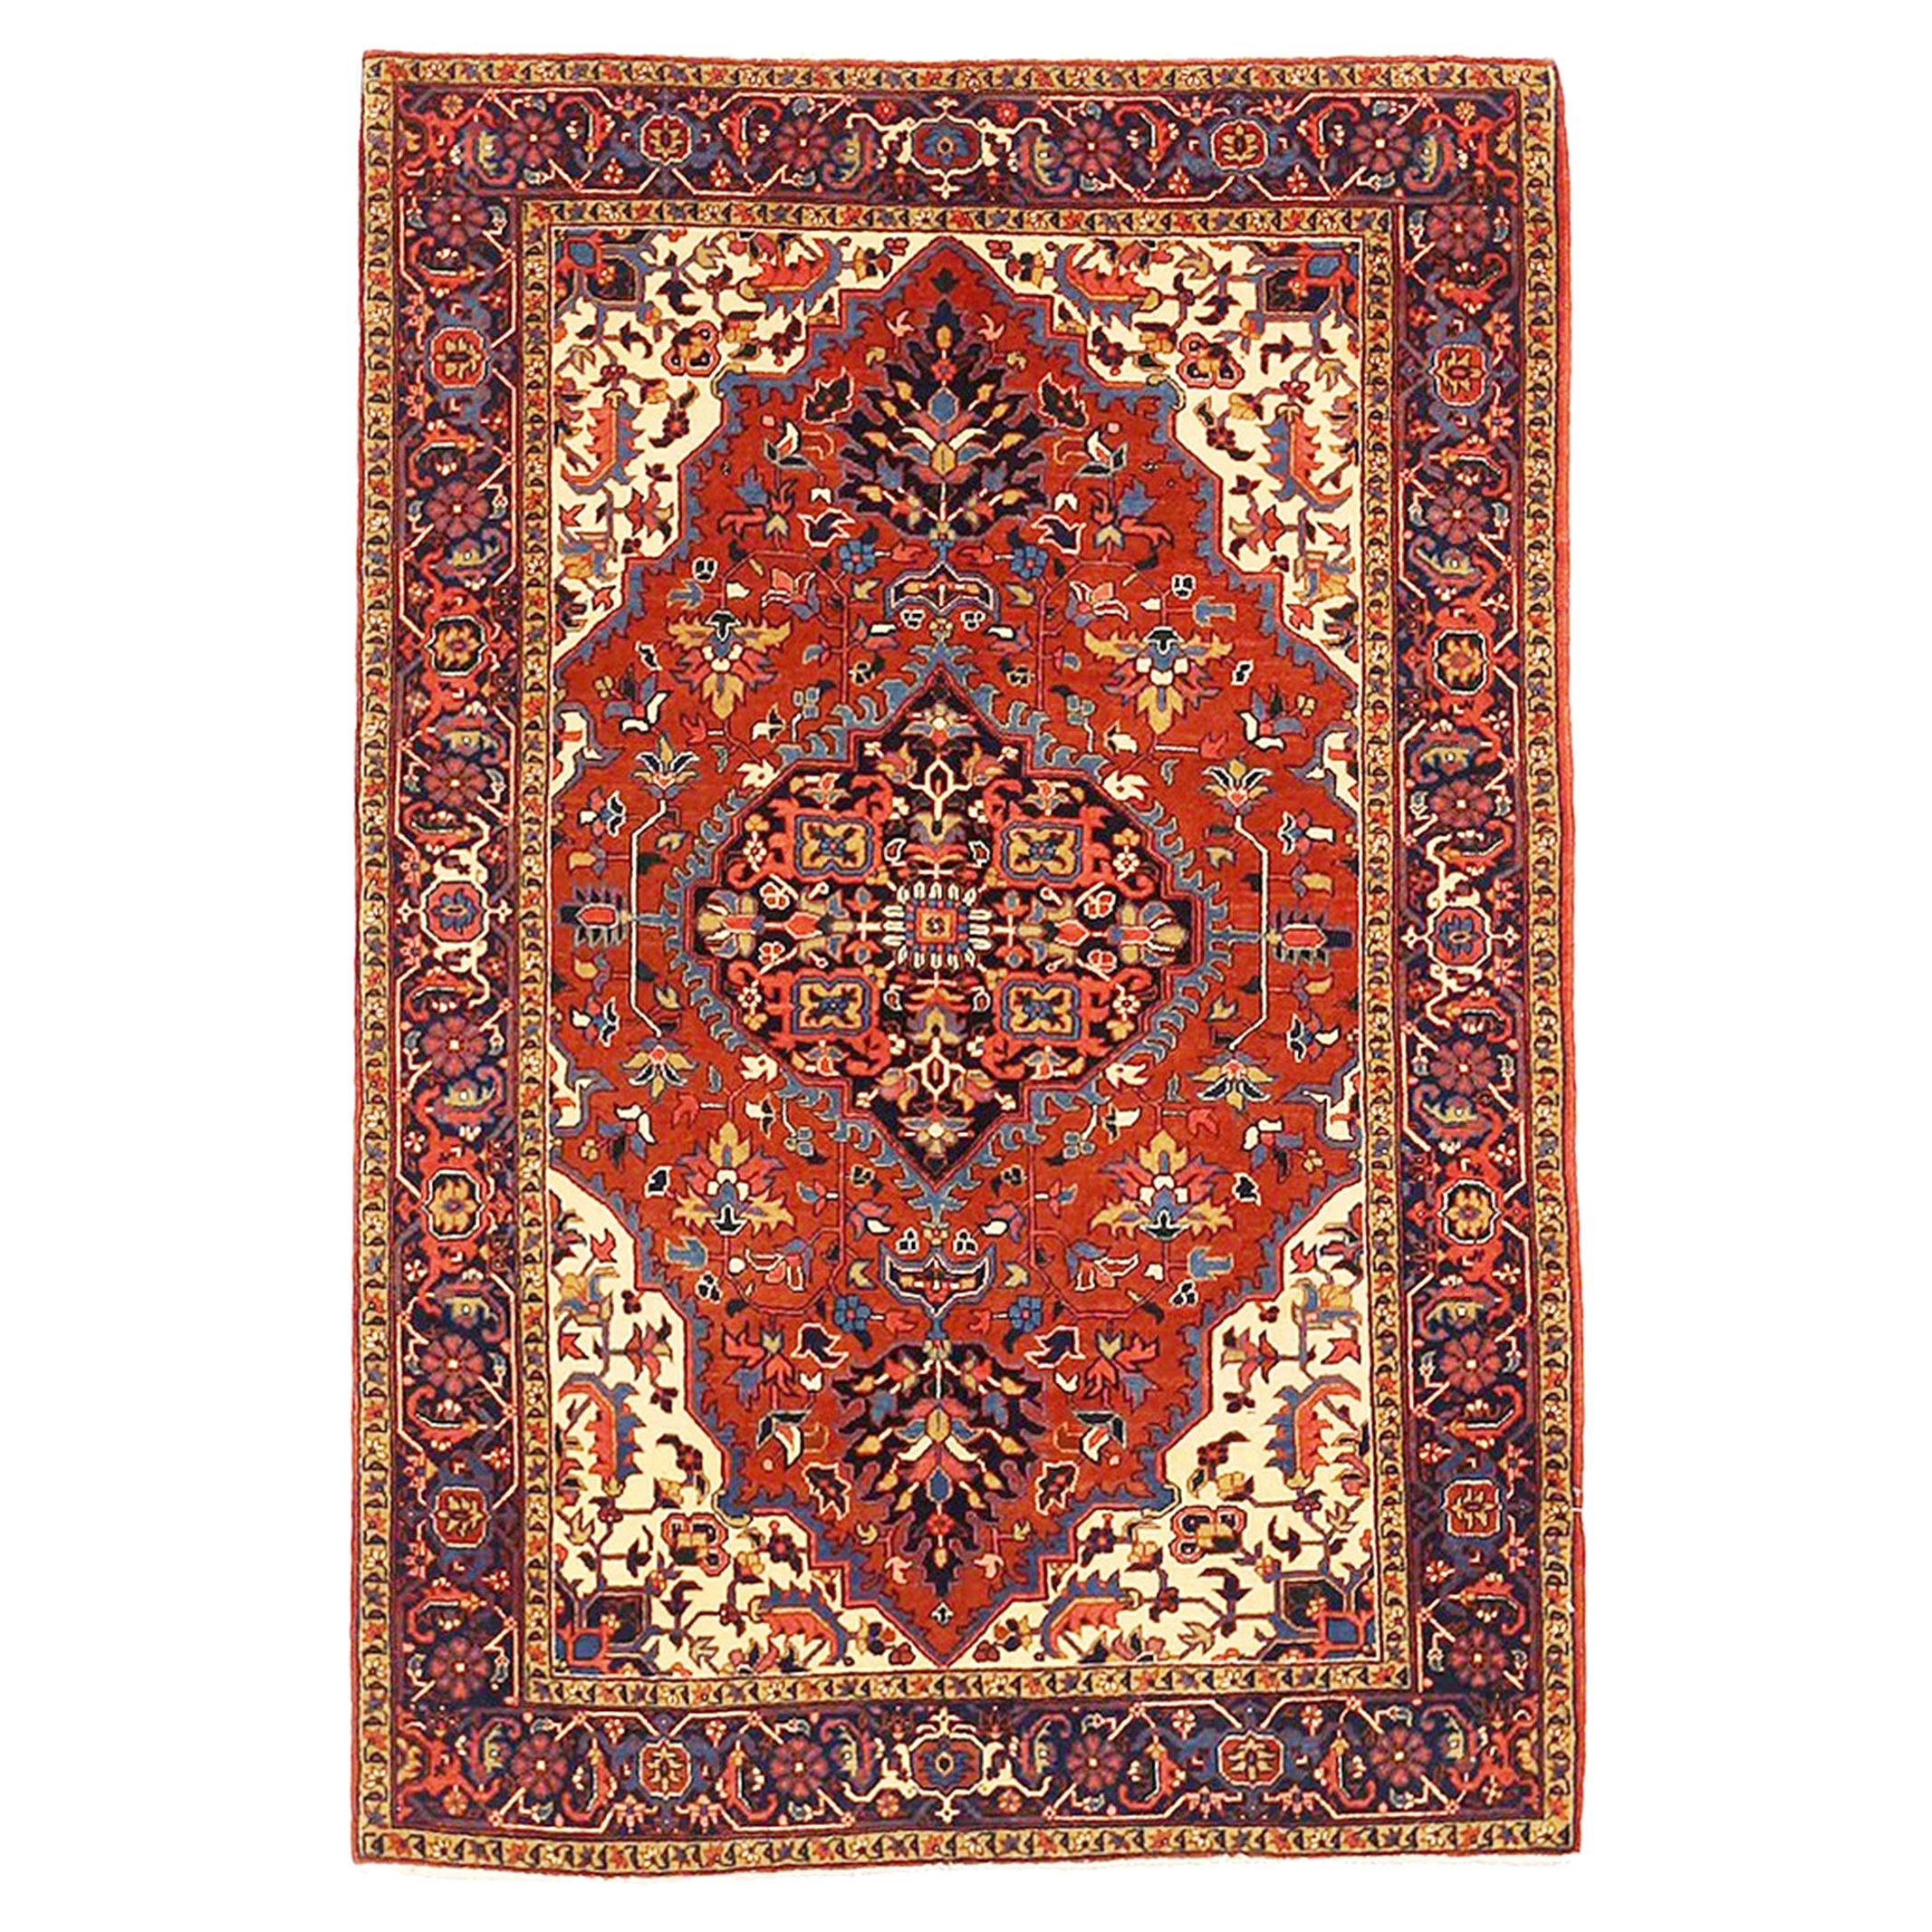 Antique Persian Heriz Rug with Beige & Blue Floral Details on Red & Ivory Field